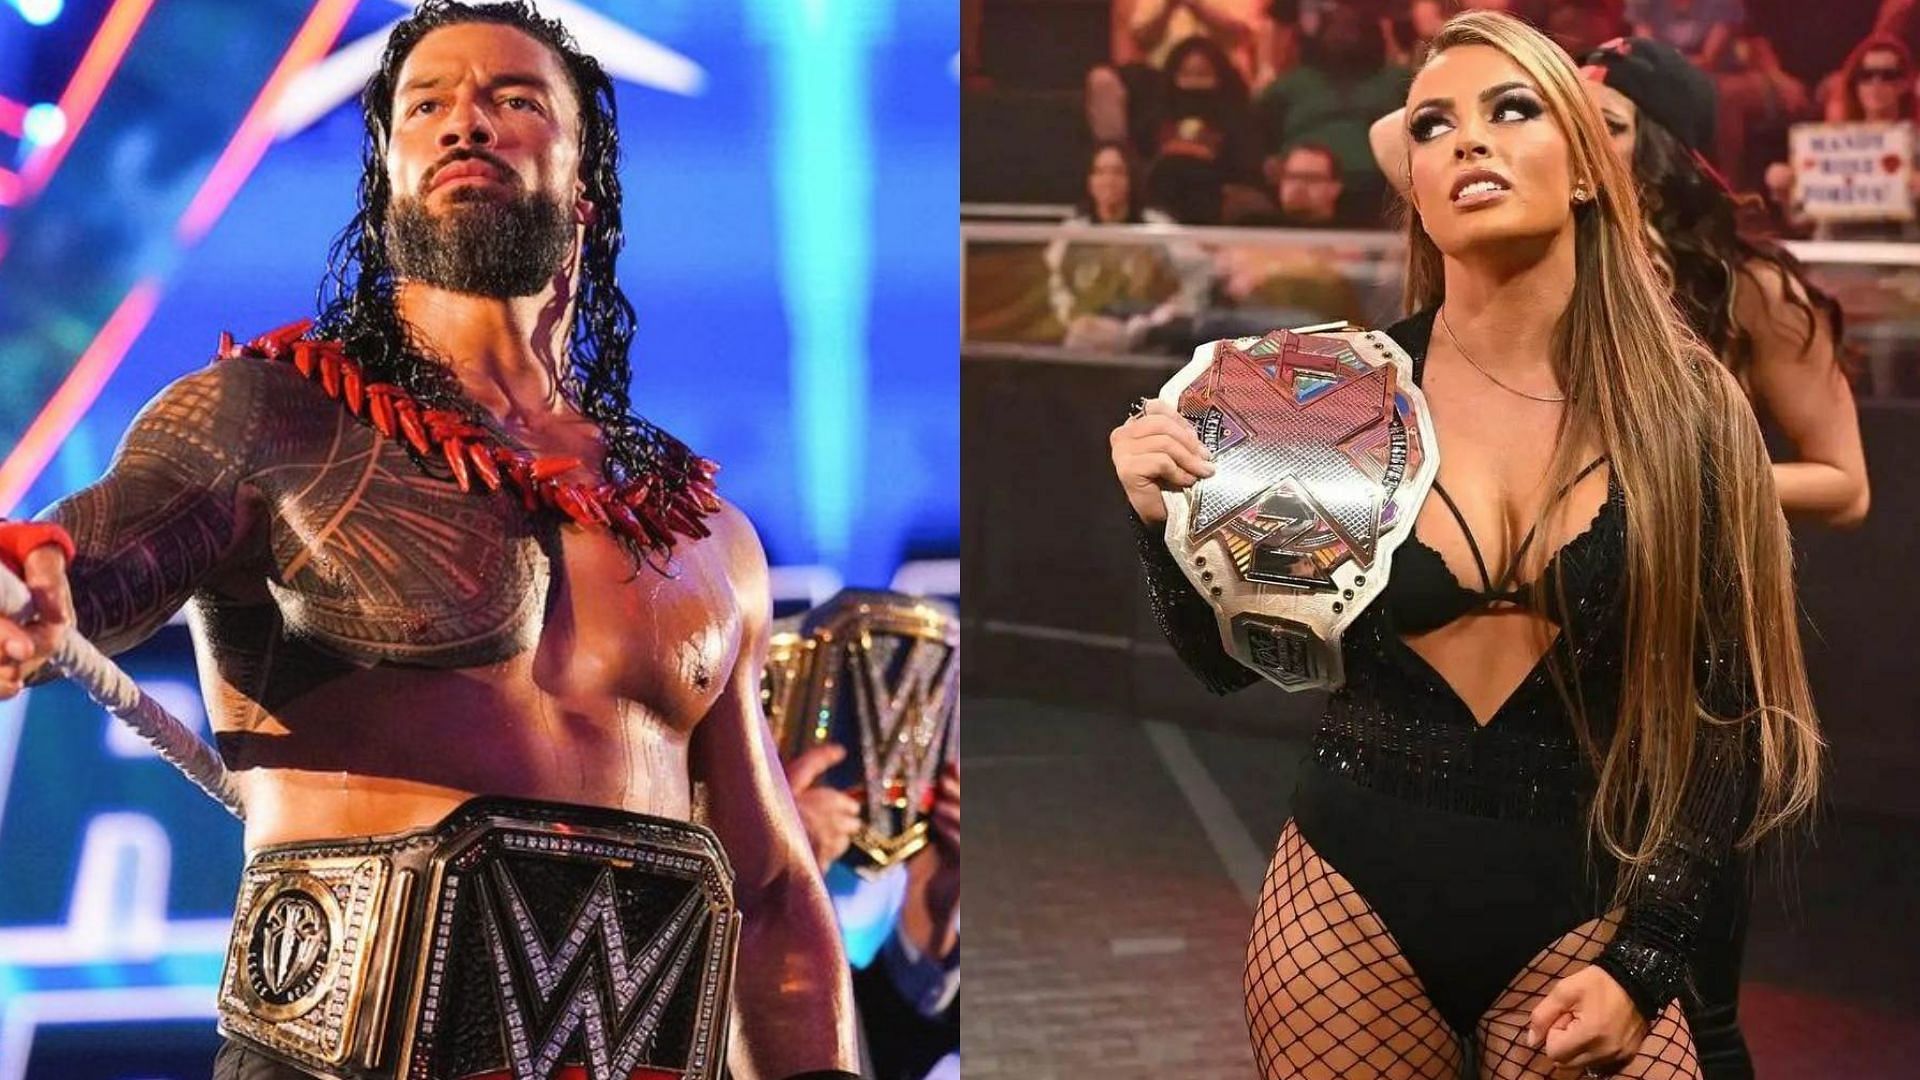 Twitter recently debated between Roman Reigns and Mandy Rose